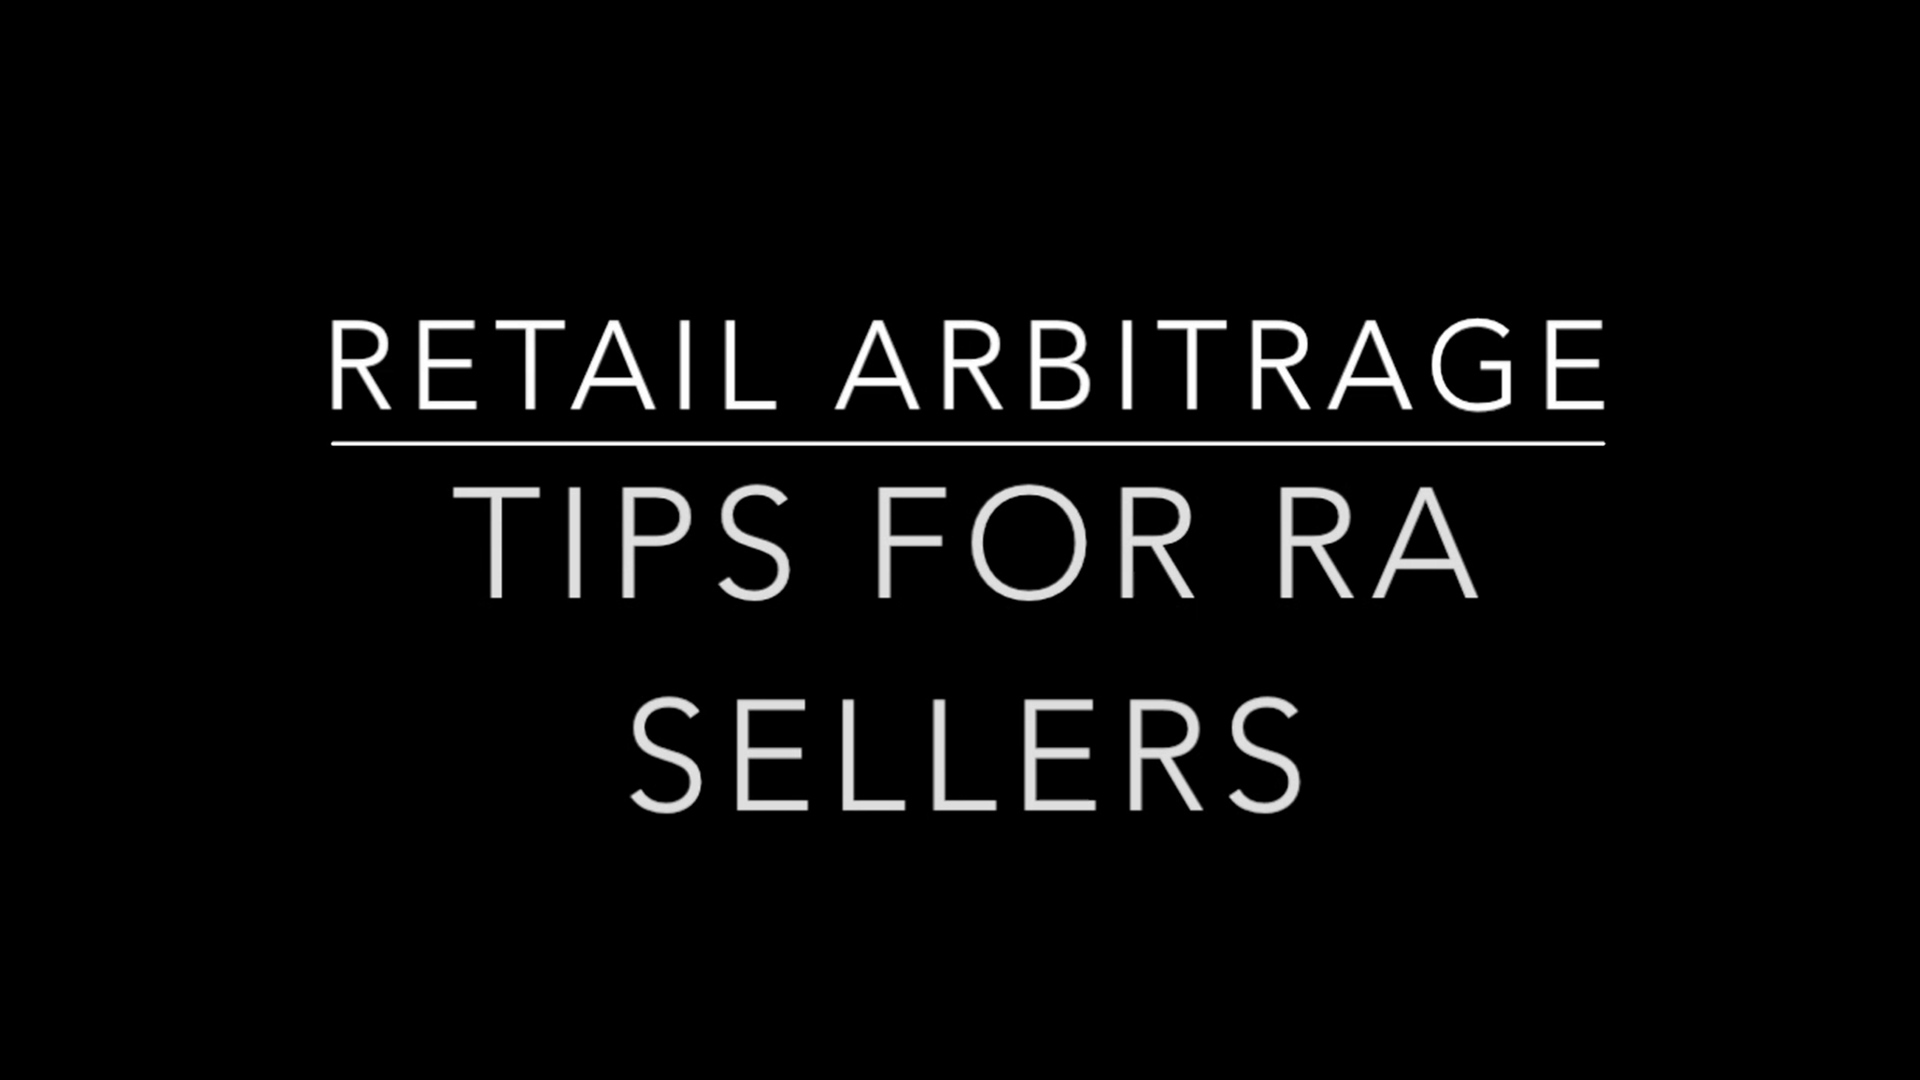 Retail Arbitrage - Tips for RA Sellers